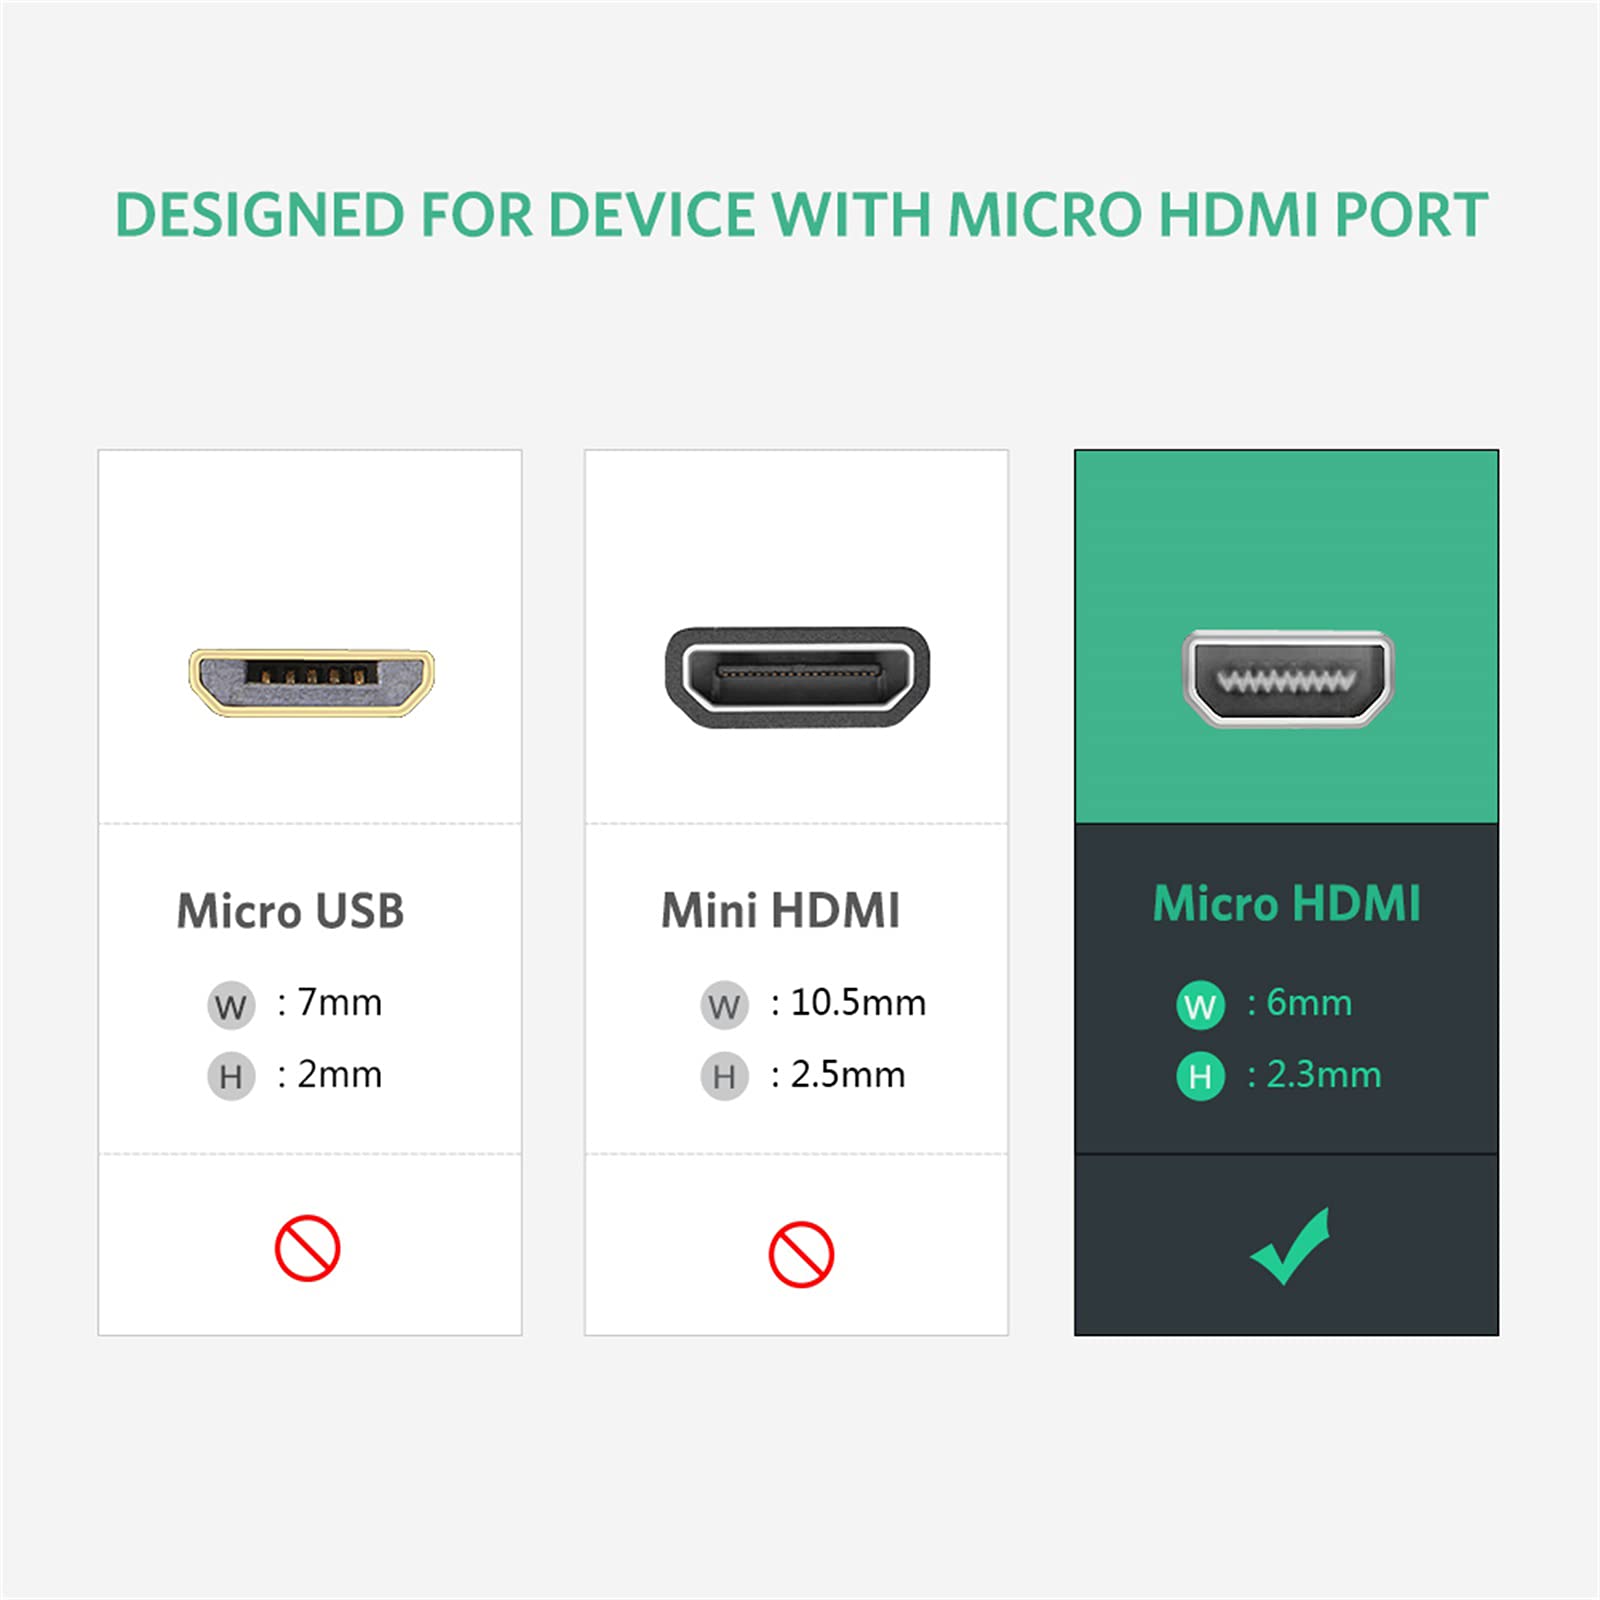 UGREEN Active Micro HDMI to HDMI Converter, Micro HDMI to VGA Adapter, with 3.5mm Audio Jack and Micro USB Power Port for Hero 7, 6, Ultrabooks, Lenovo Yoga 3, Asus ZenBook UX30, Cameras, Black